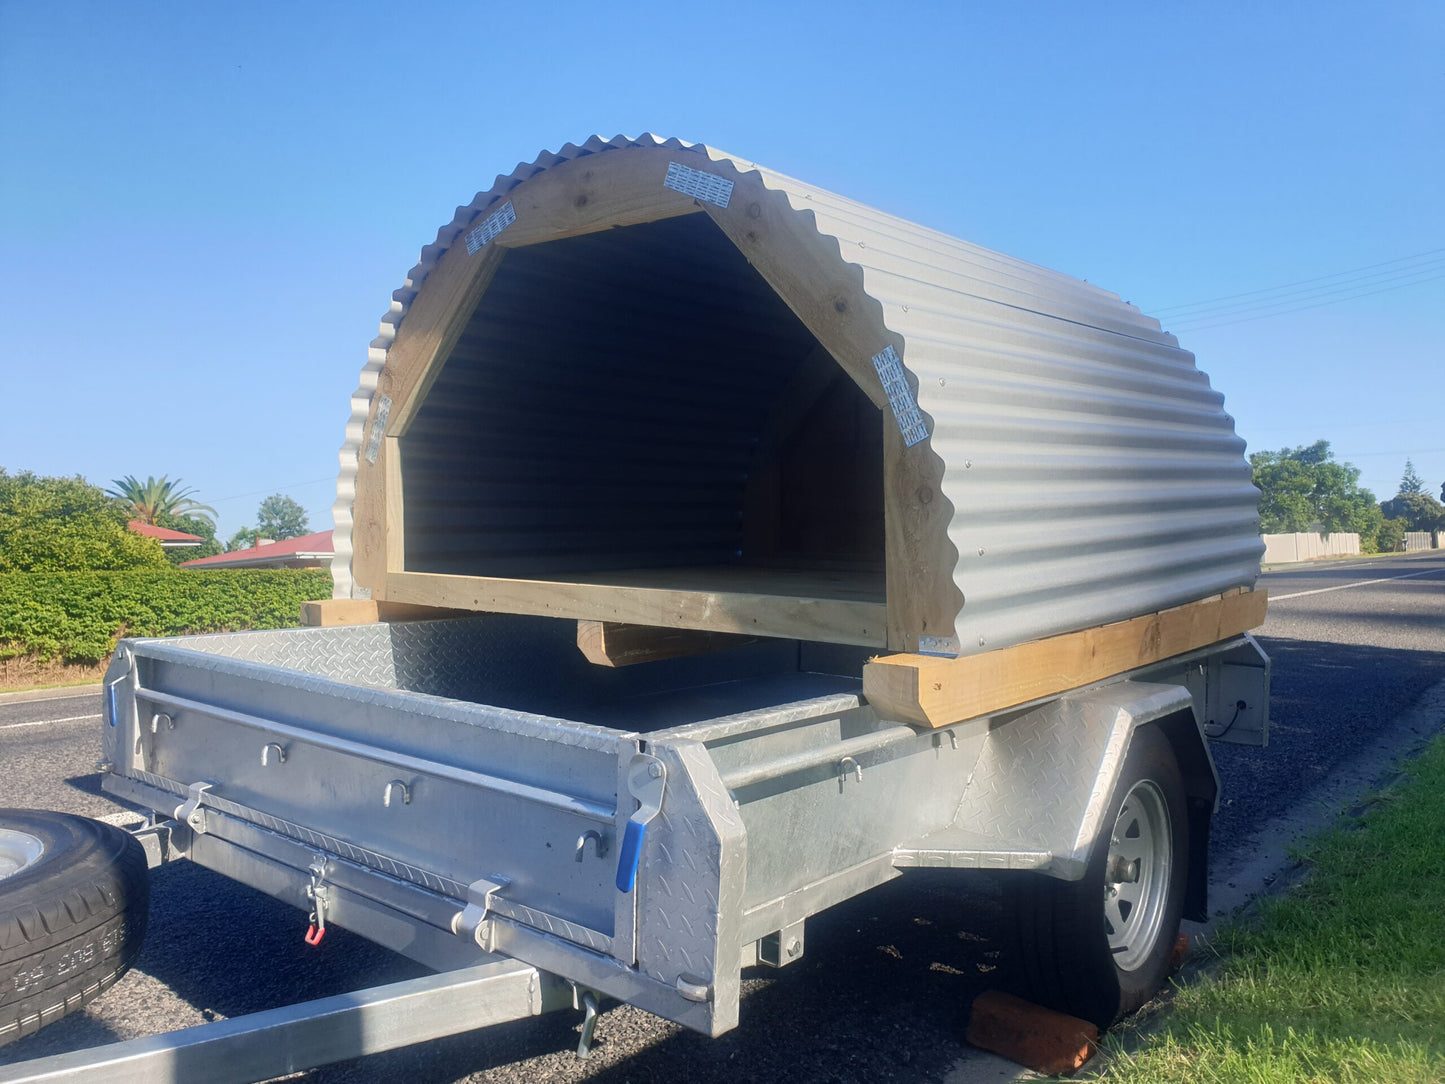 Animal shelter for sale in NZ | suitable for large dogs, pigs, lambs and calves | Round wooden shelter with corrugate iron roof, floor boards and back wall waiting for delivery on a single axle trailer | For sale in Auckland, Waikato and the North Island New Zeland